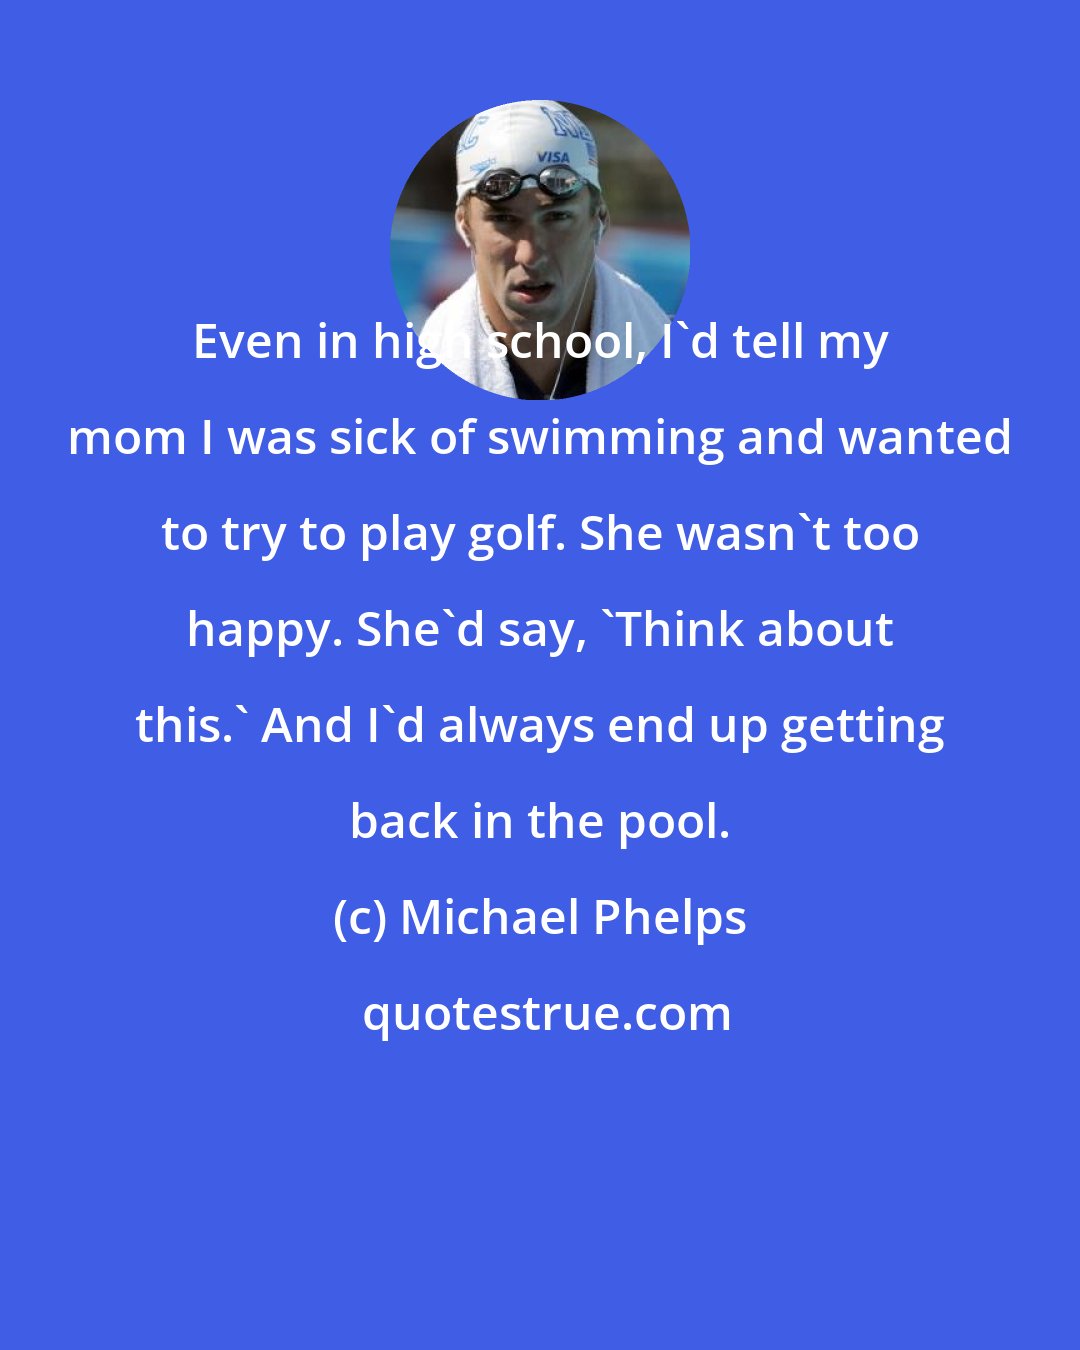 Michael Phelps: Even in high school, I'd tell my mom I was sick of swimming and wanted to try to play golf. She wasn't too happy. She'd say, 'Think about this.' And I'd always end up getting back in the pool.